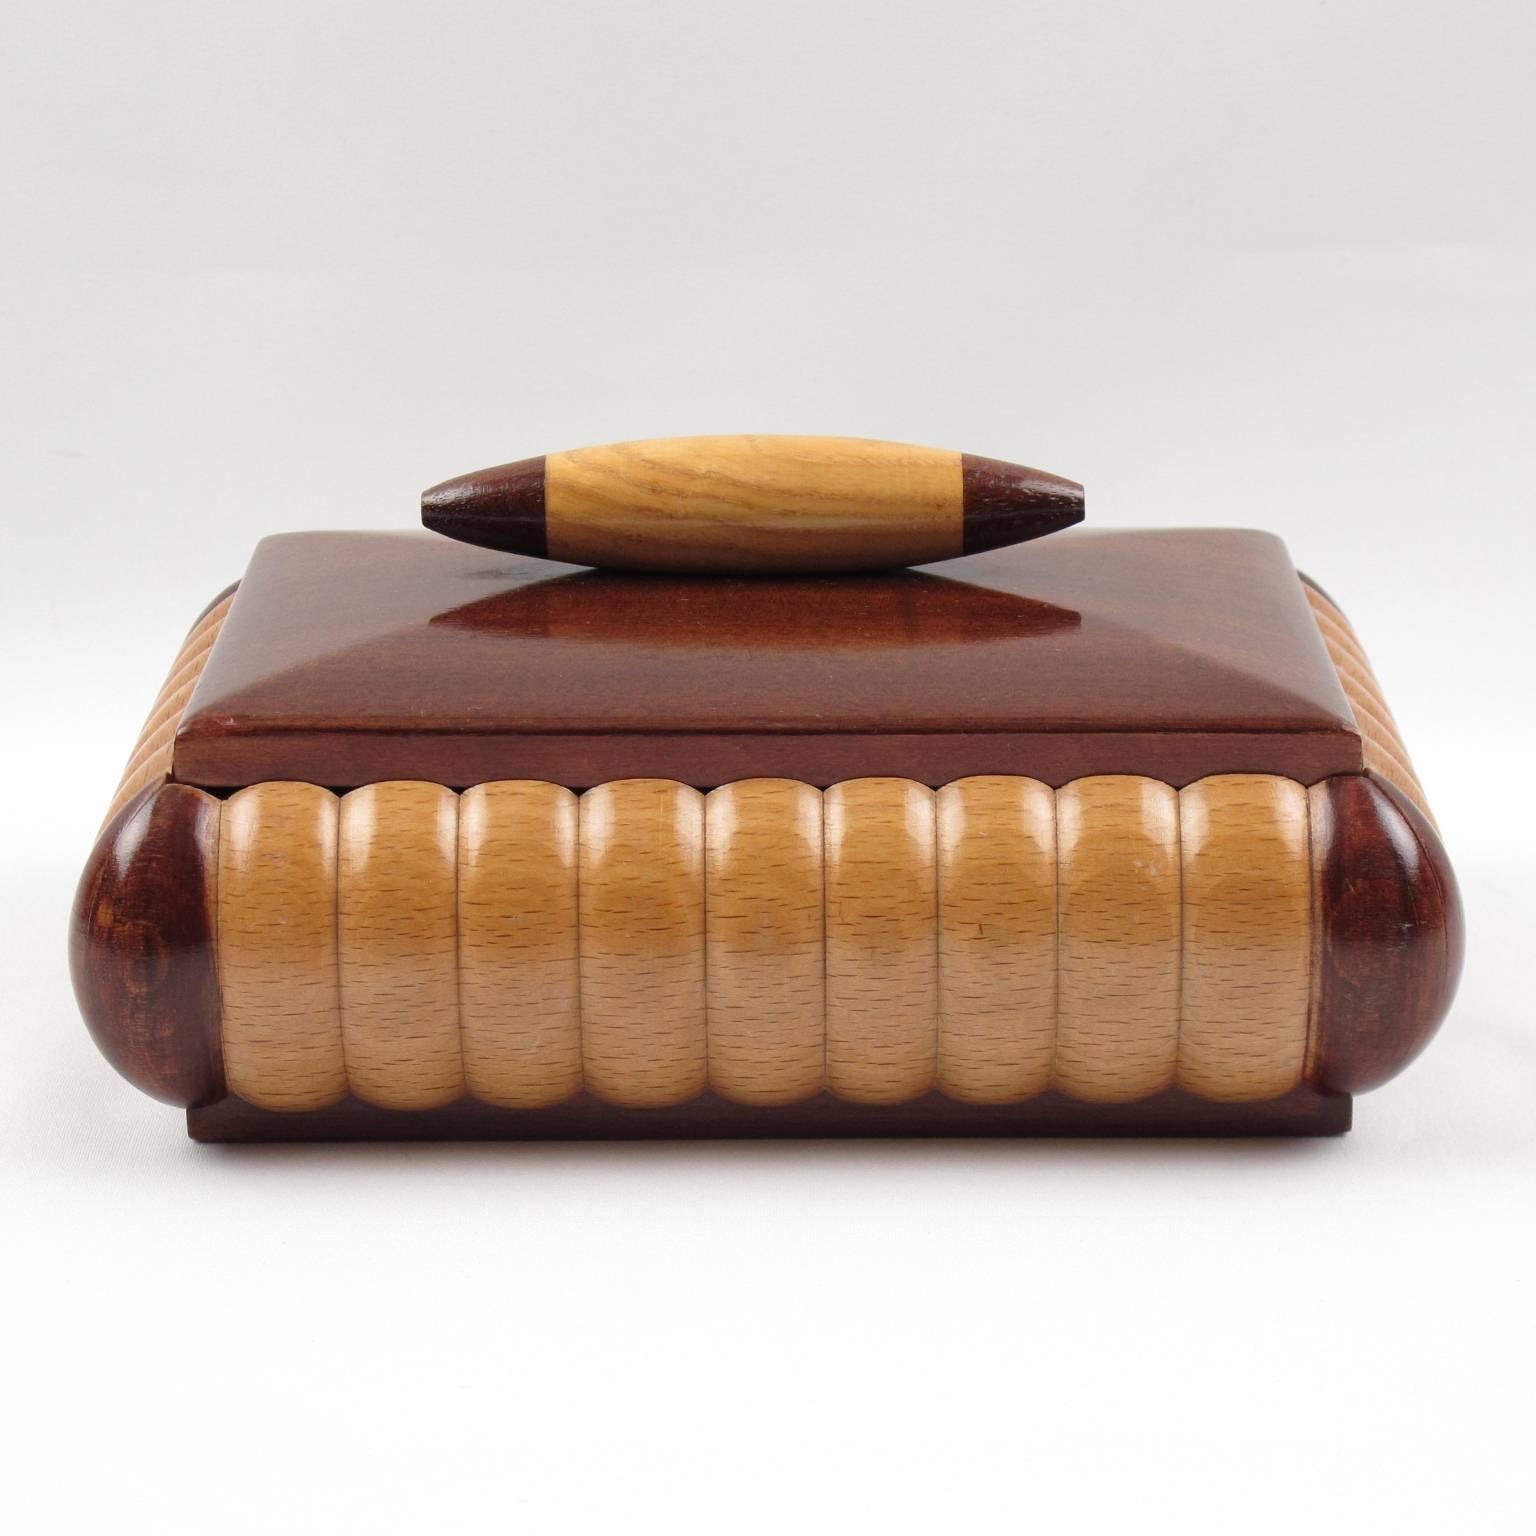 Stunning vintage large decorative lidded box from the French Art Deco period, circa 1940s. Rectangular shape with varnish mahogany and lemon tree wood all carved and shaped. The interior is in natural lemon tree. Mahogany lid with bi-color carved